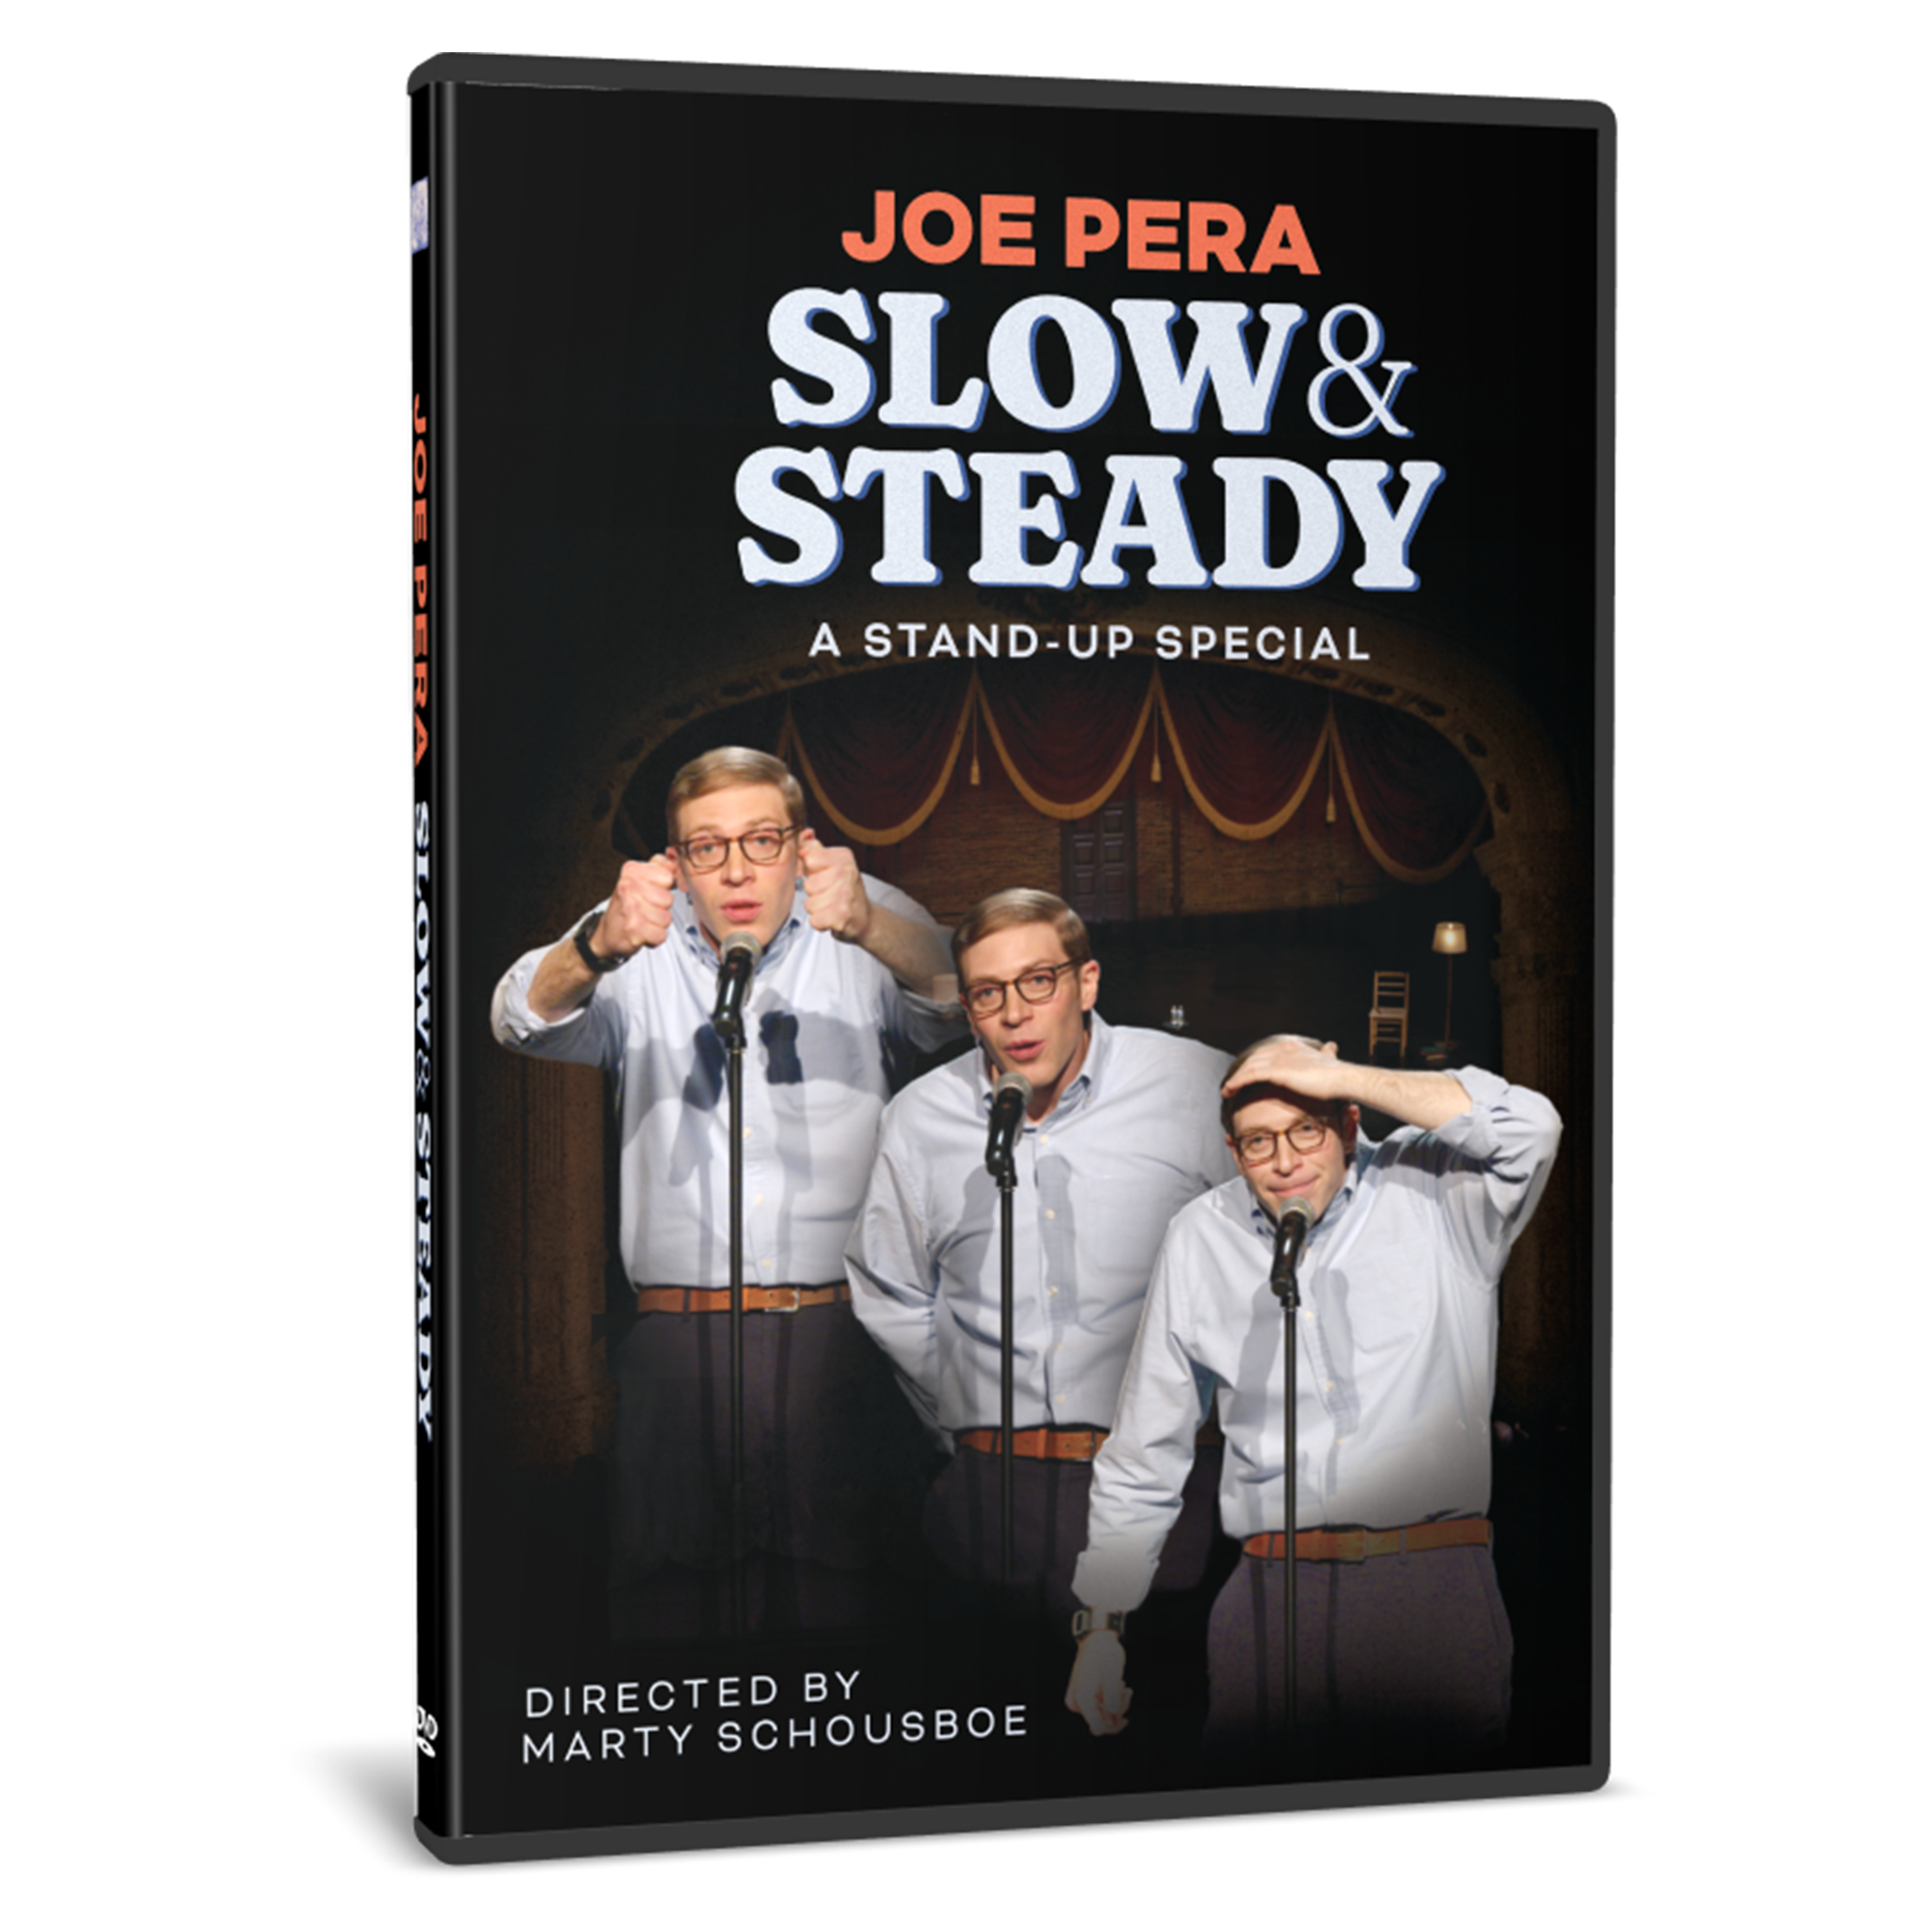 Joe Pera | Slow & Steady DVD With Autographed Insert